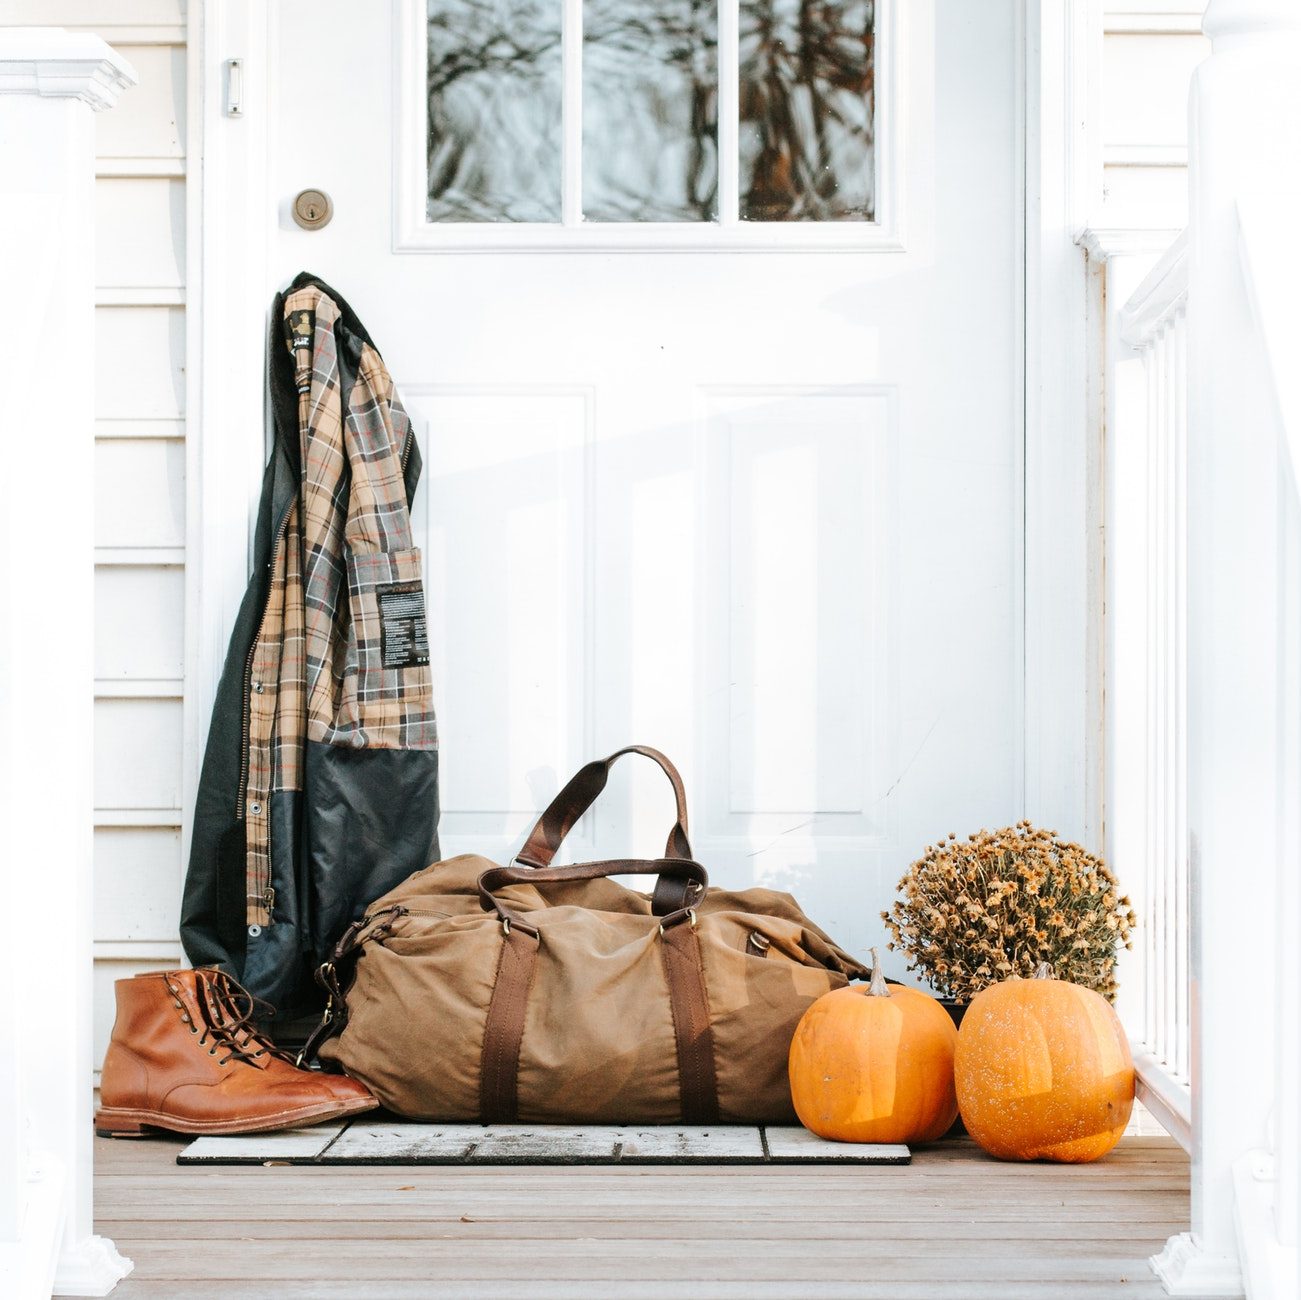 How To Decorate For Fall